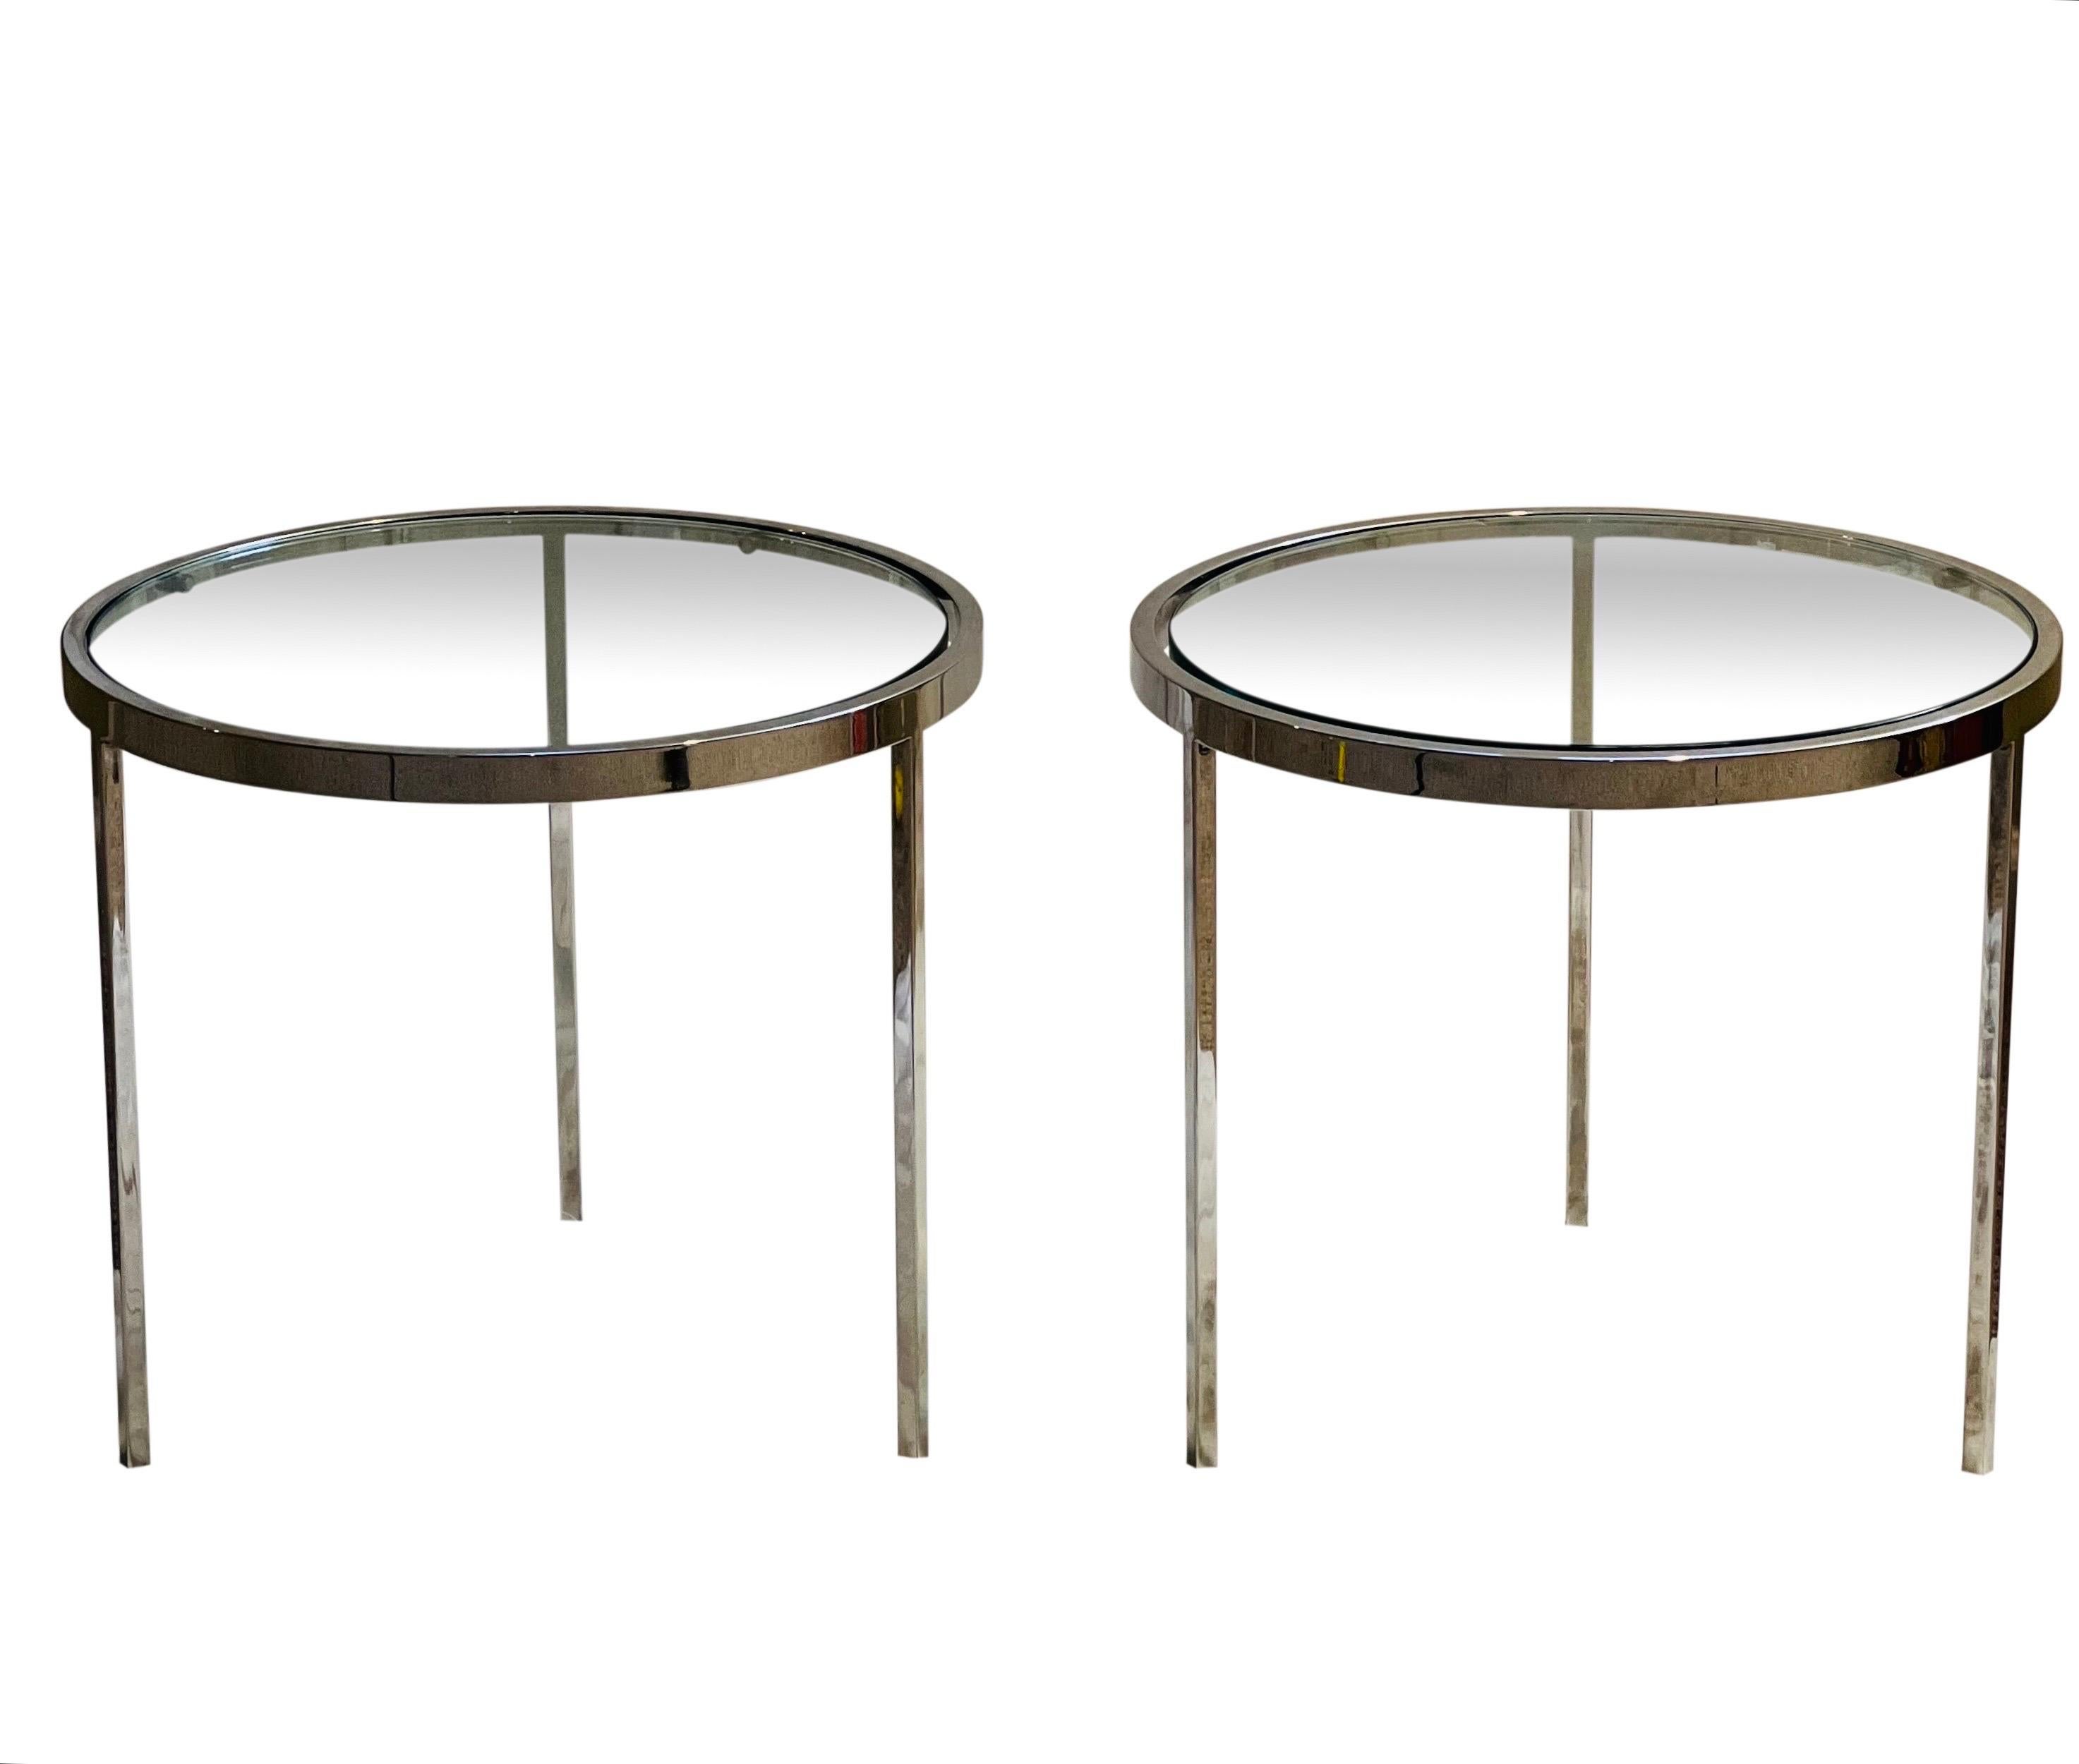 Pair of Milo Baughman low side tables. 

The pair features a flat bar, polished chrome frame, half inch thick glass and three straight legs. Sturdy tables with a modern and super clean design in very nice condition.